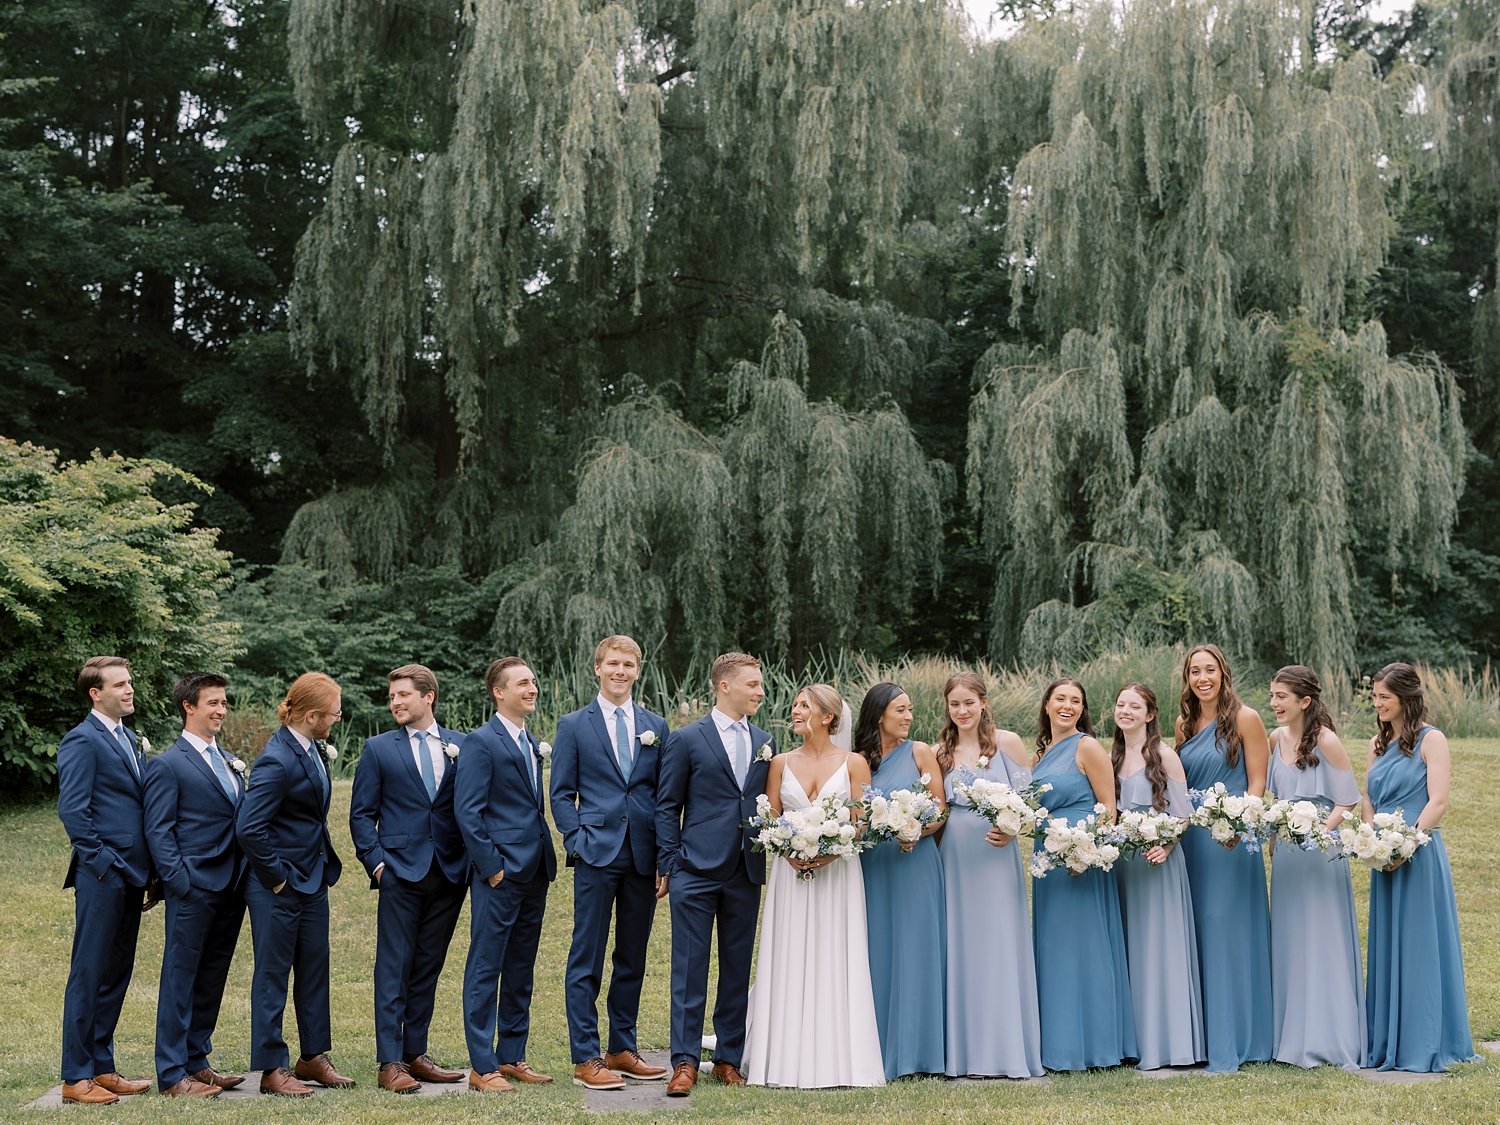 bride and groom pose with wedding party in navy blue suits and light blue gowns 